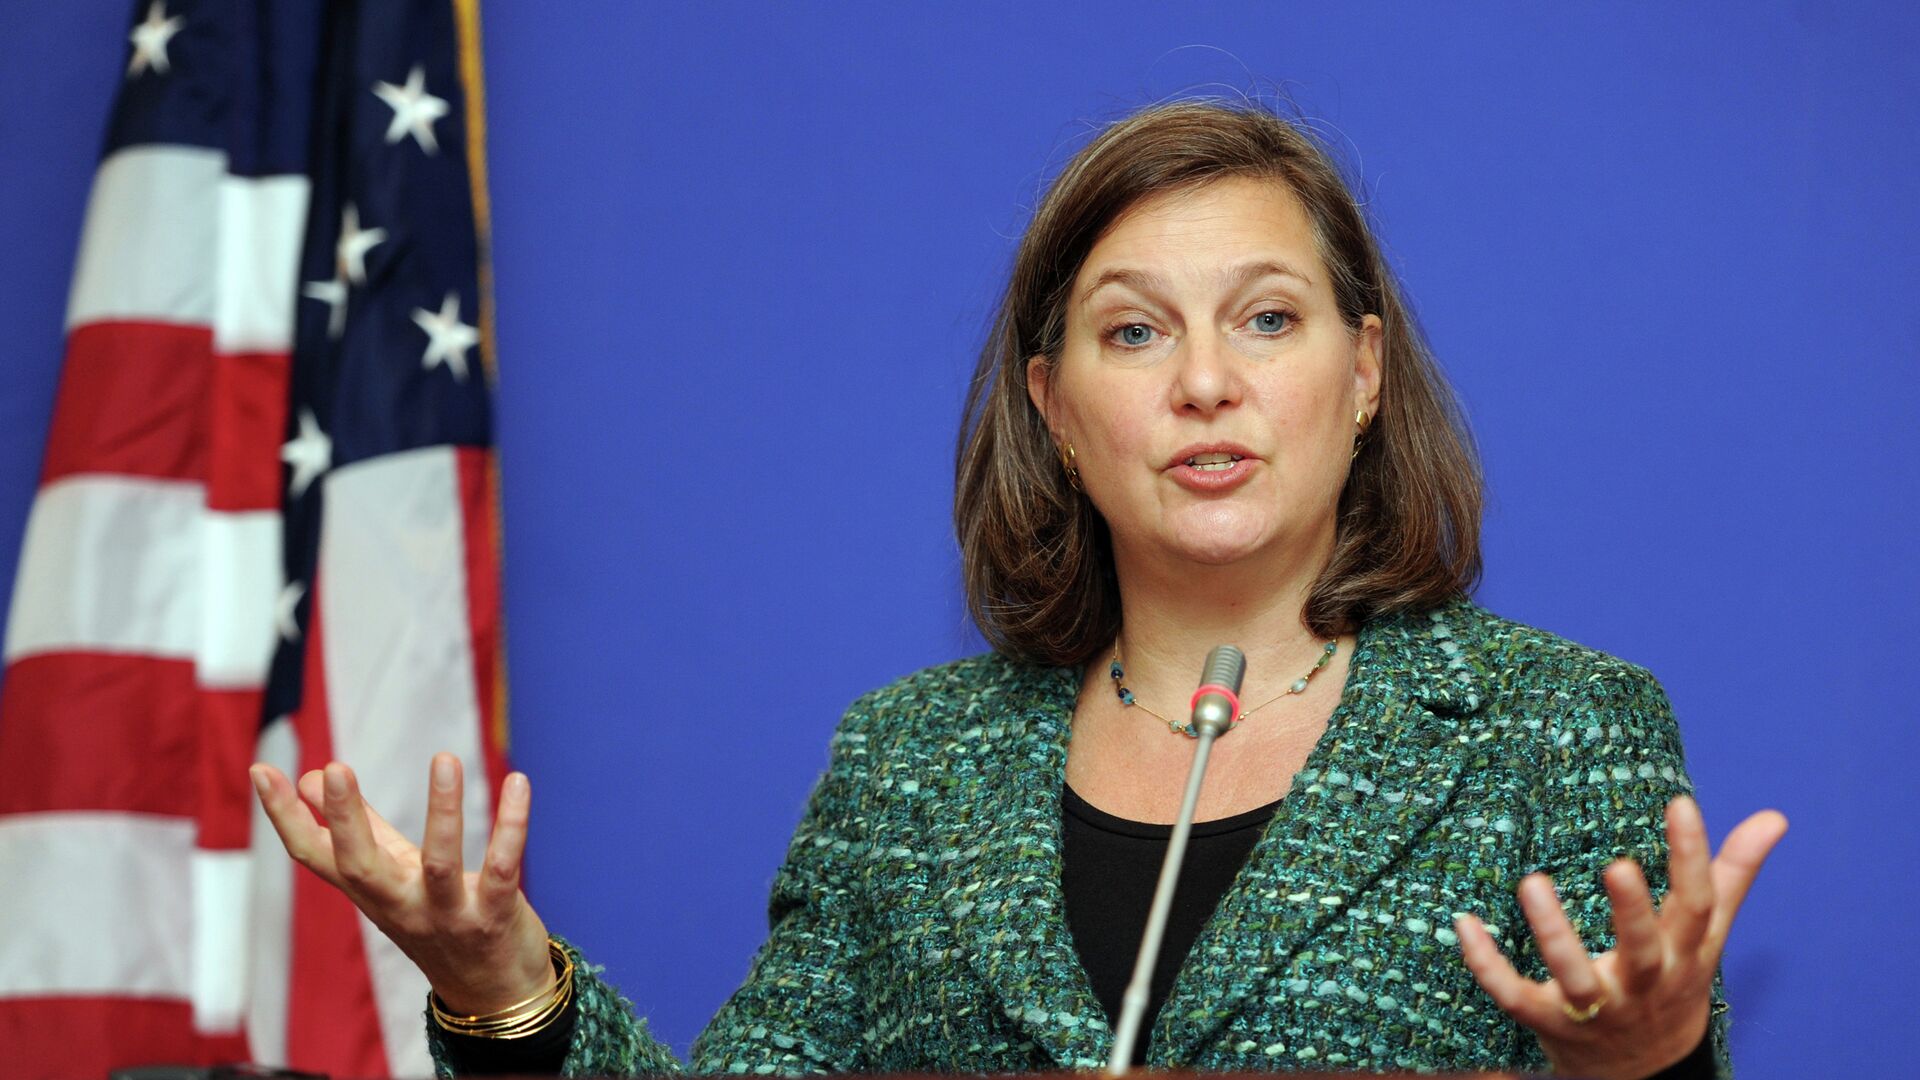 US Assistant Secretary of State for European and Eurasian Affairs Victoria Nuland gestures as she speaks during her press conference in Tbilisi on February 17, 2015 - Sputnik International, 1920, 12.10.2021